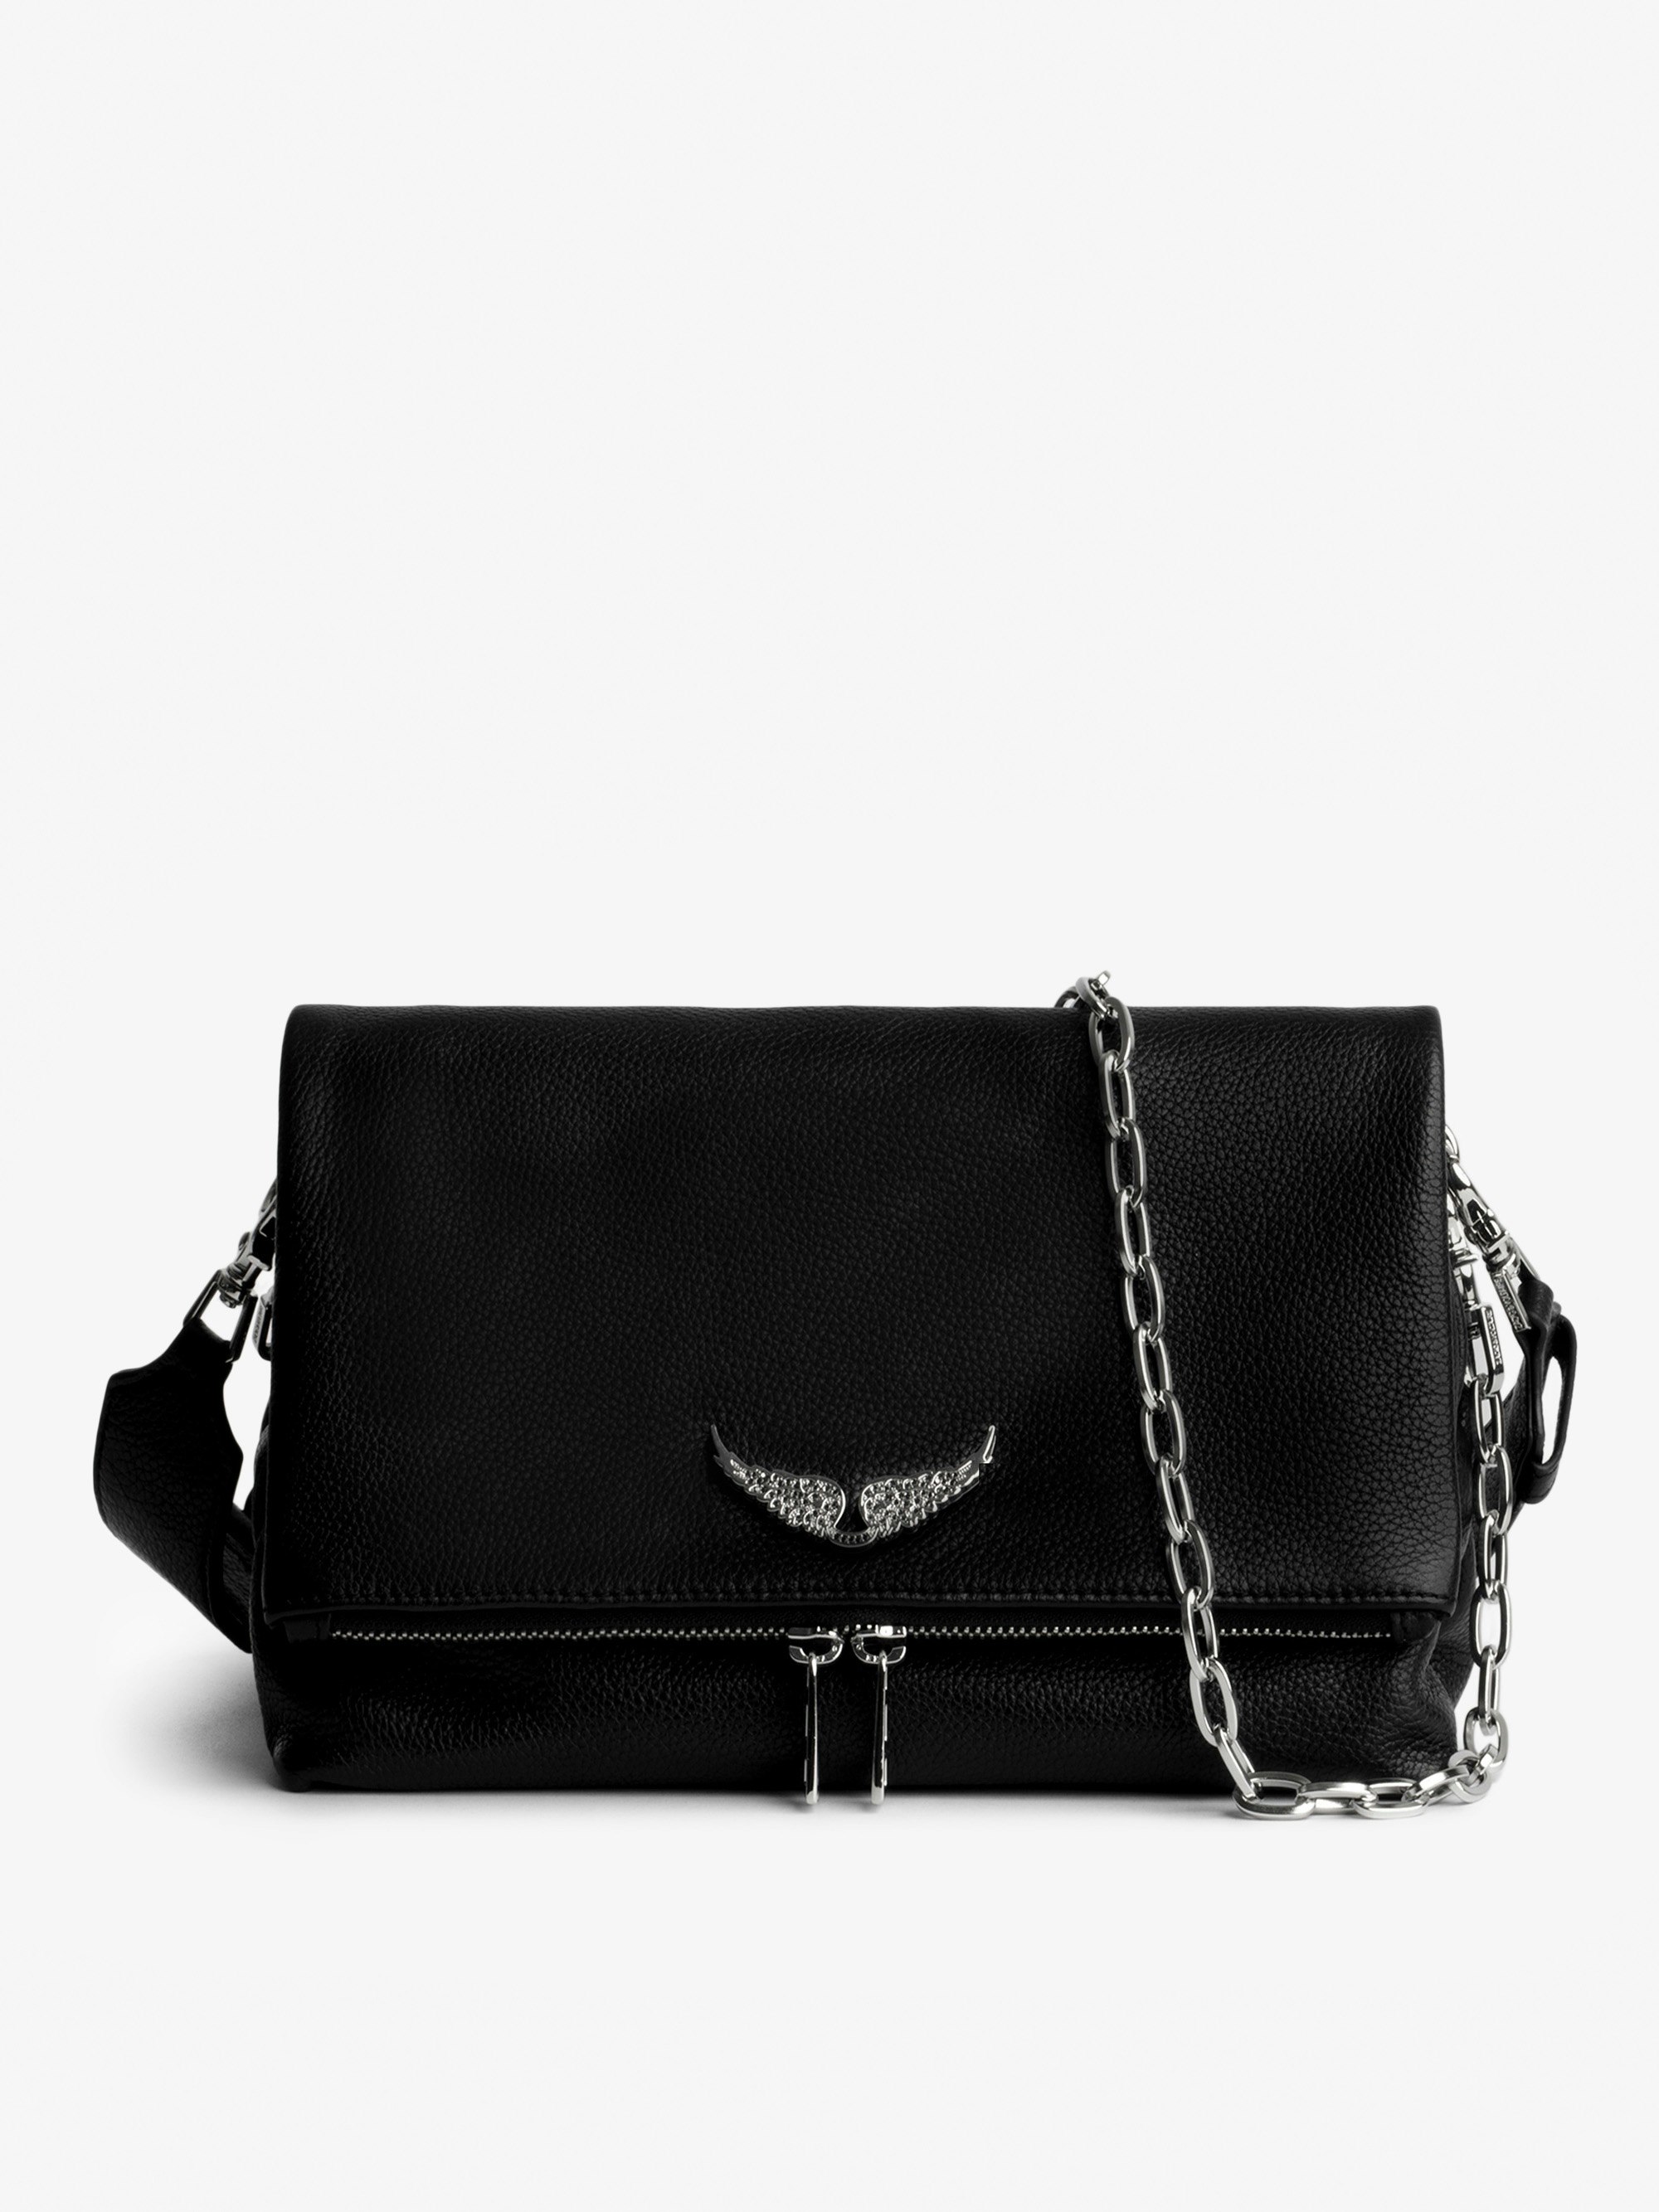 Swing Your Wings Rocky Bag - Women’s black leather Rocky bag with silver-toned metal shoulder strap